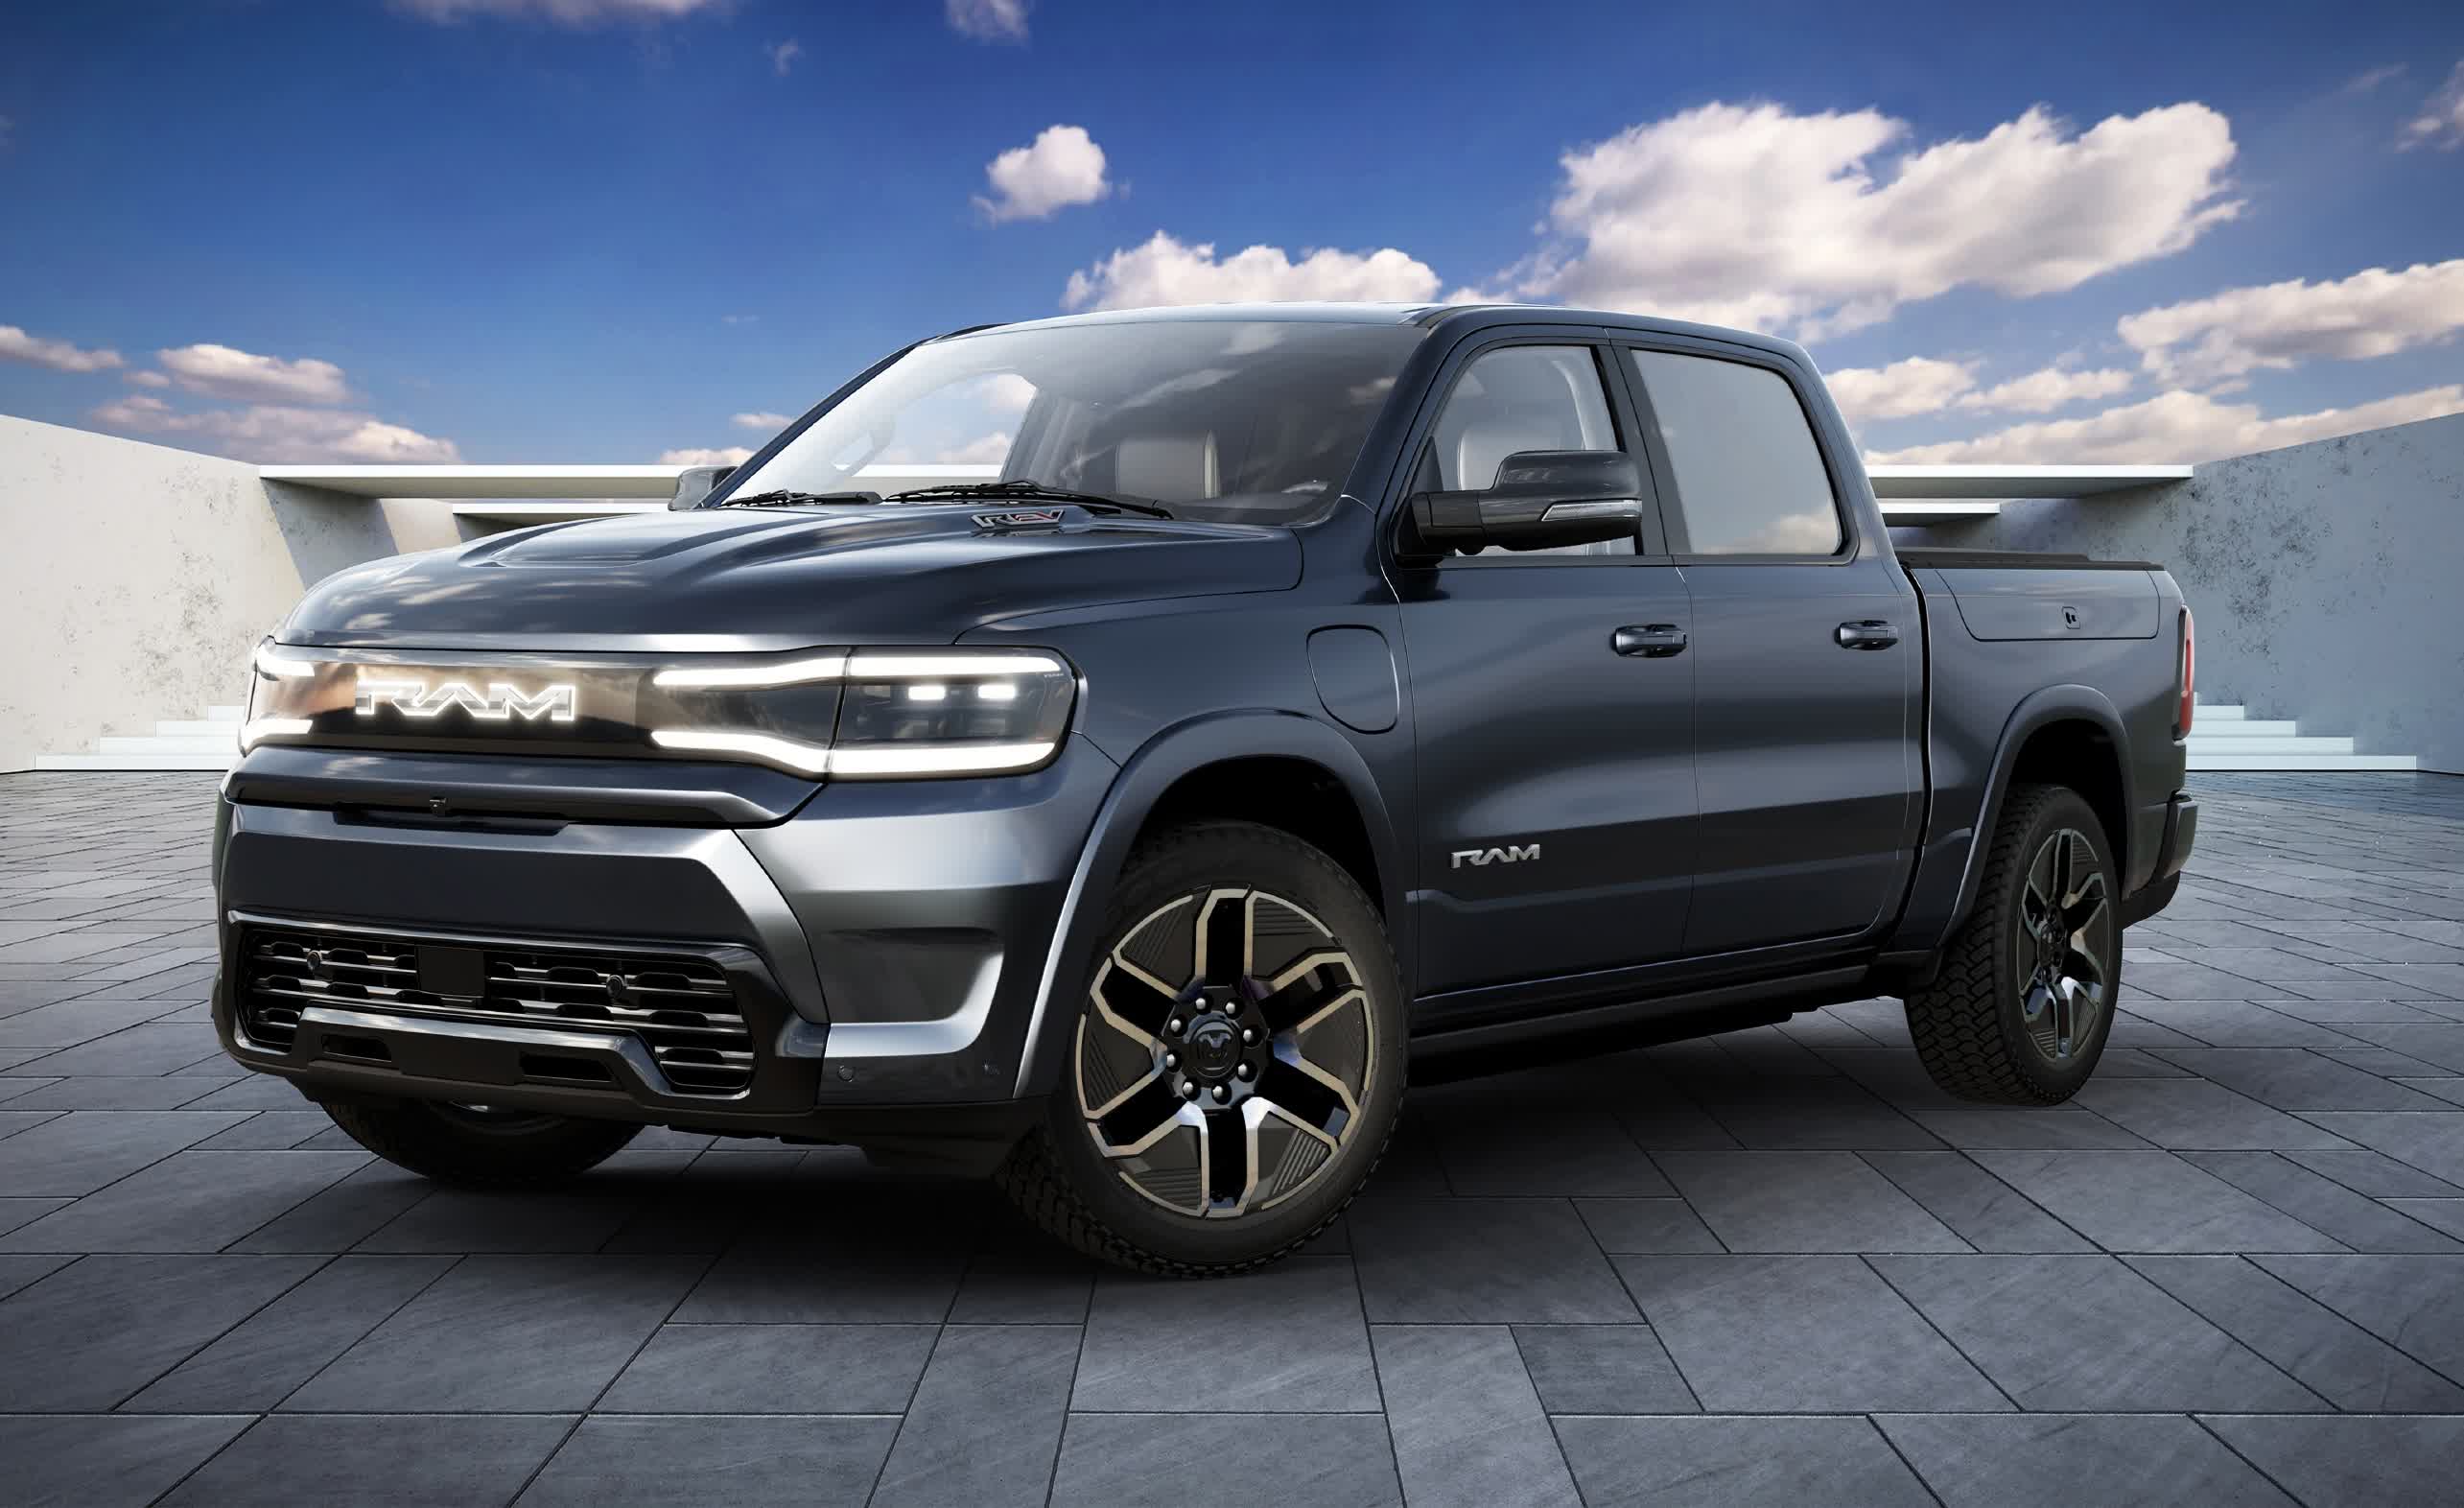 Pickup wars: Dodge introduces Ram 1500 EV with 650 horsepower and 500 miles of range